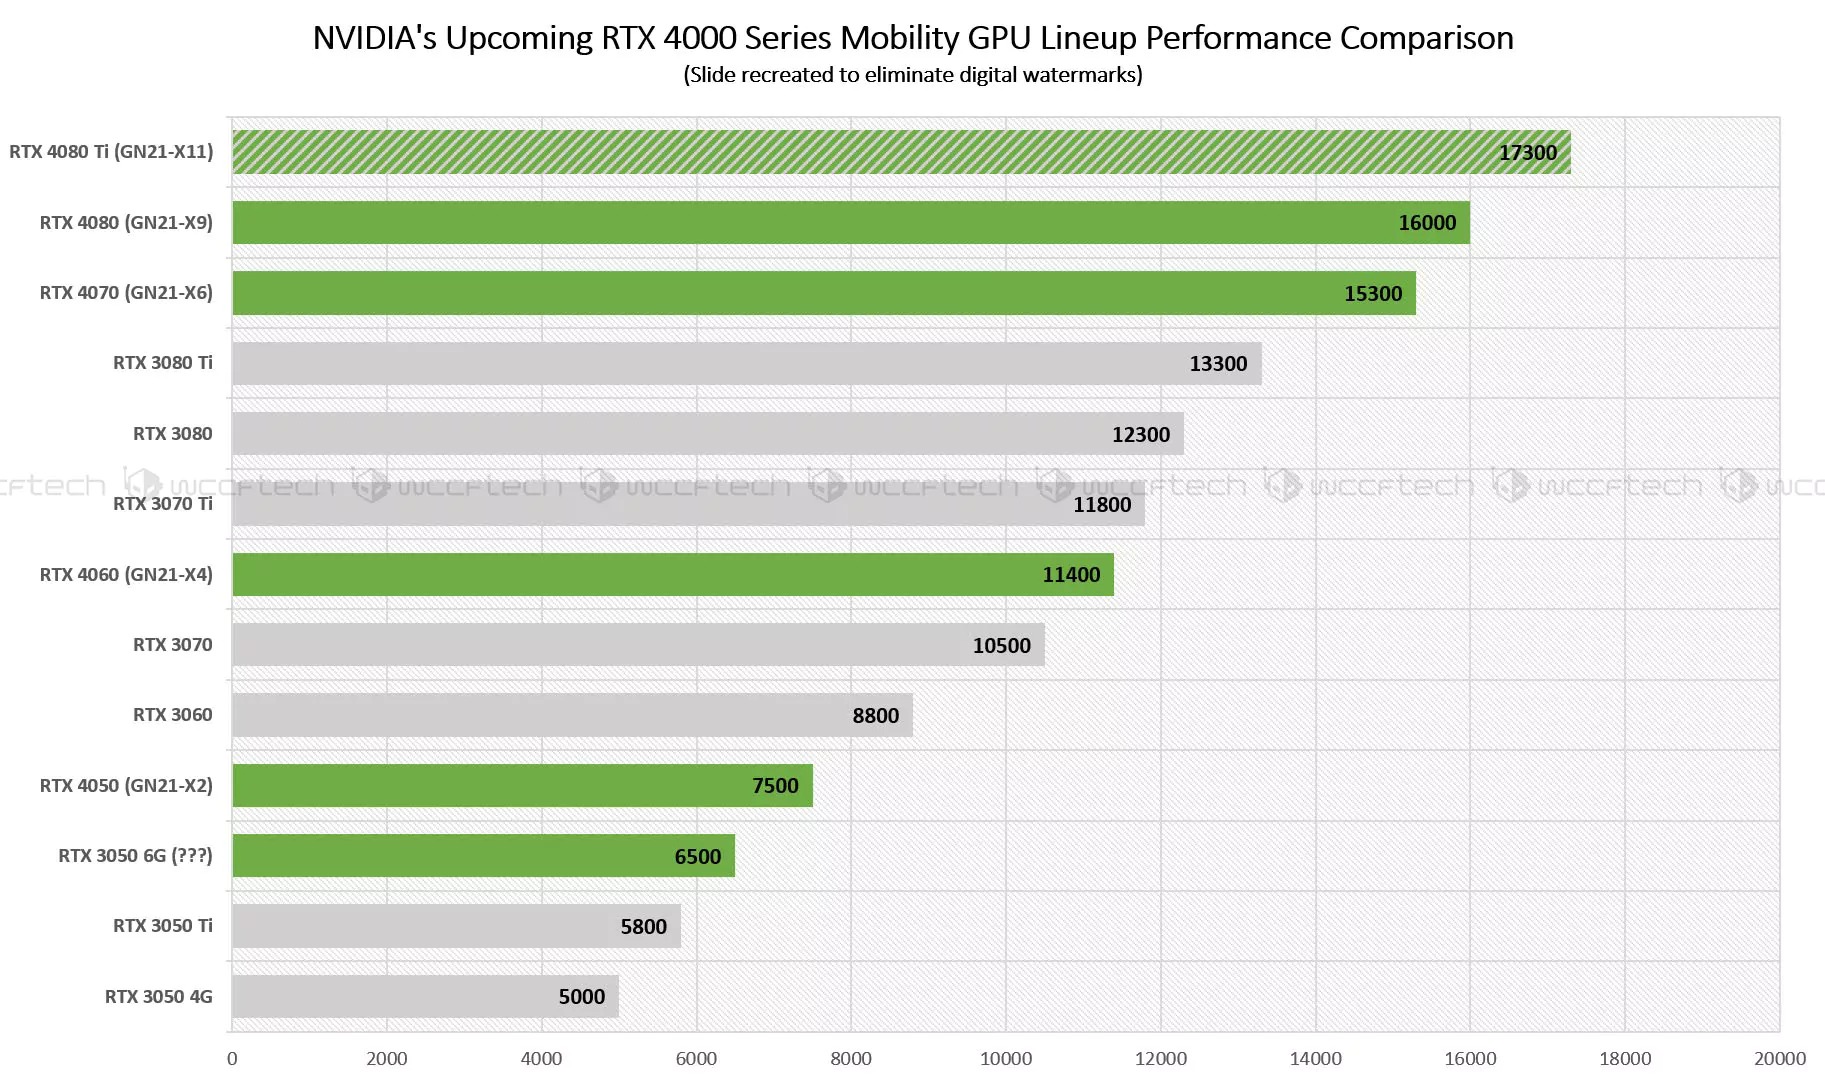 Performance Advantage of MSI Laptops with 13th Gen CPU and RTX 40 GPU